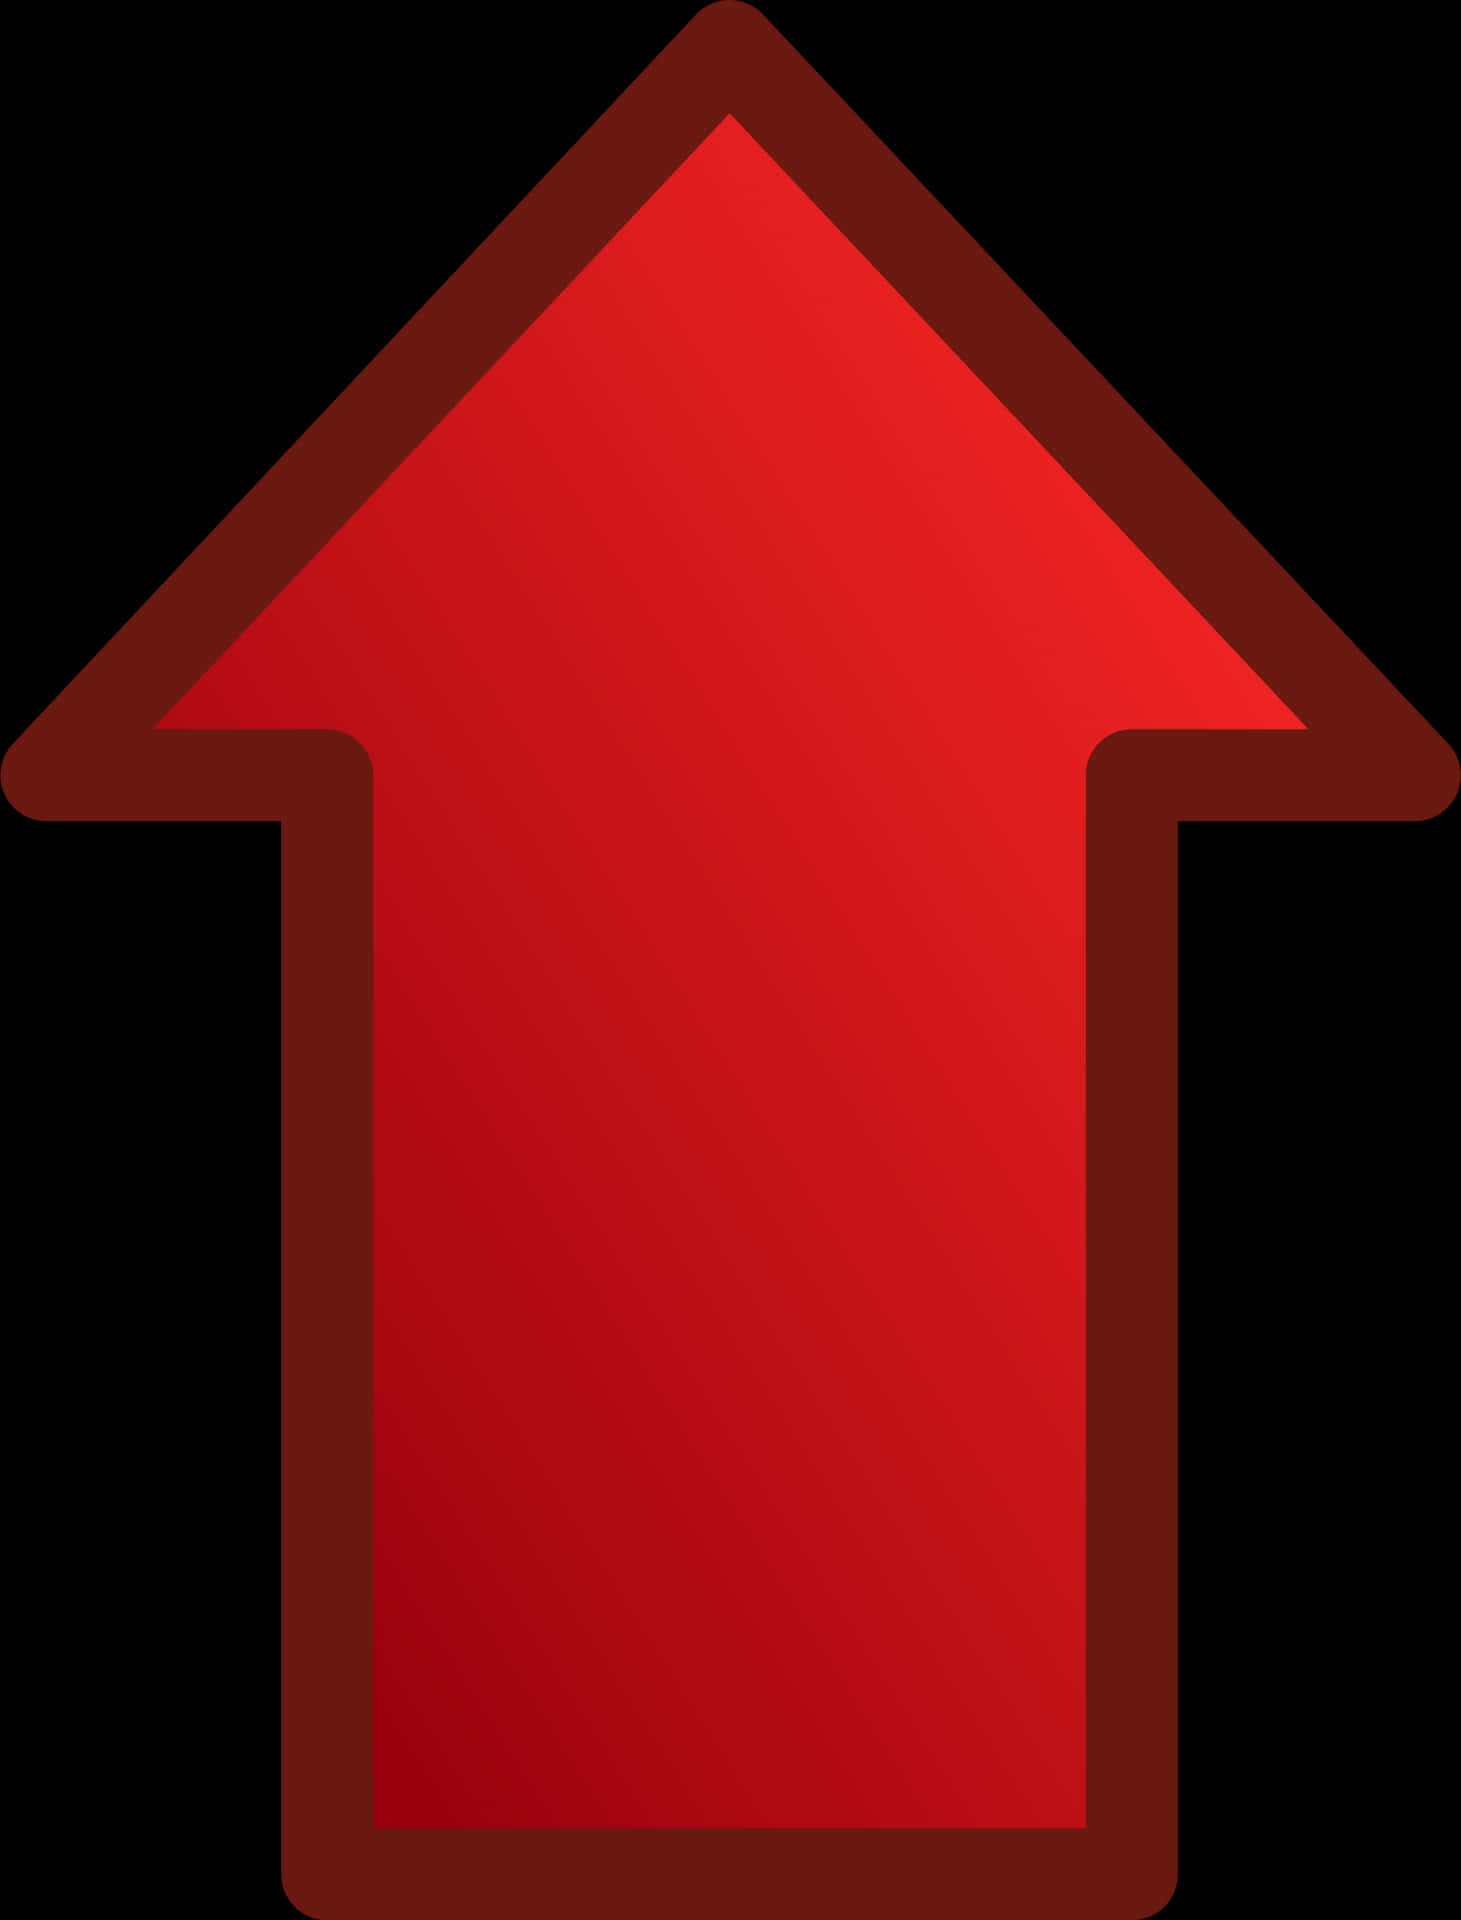 Red Upward Arrow Graphic PNG